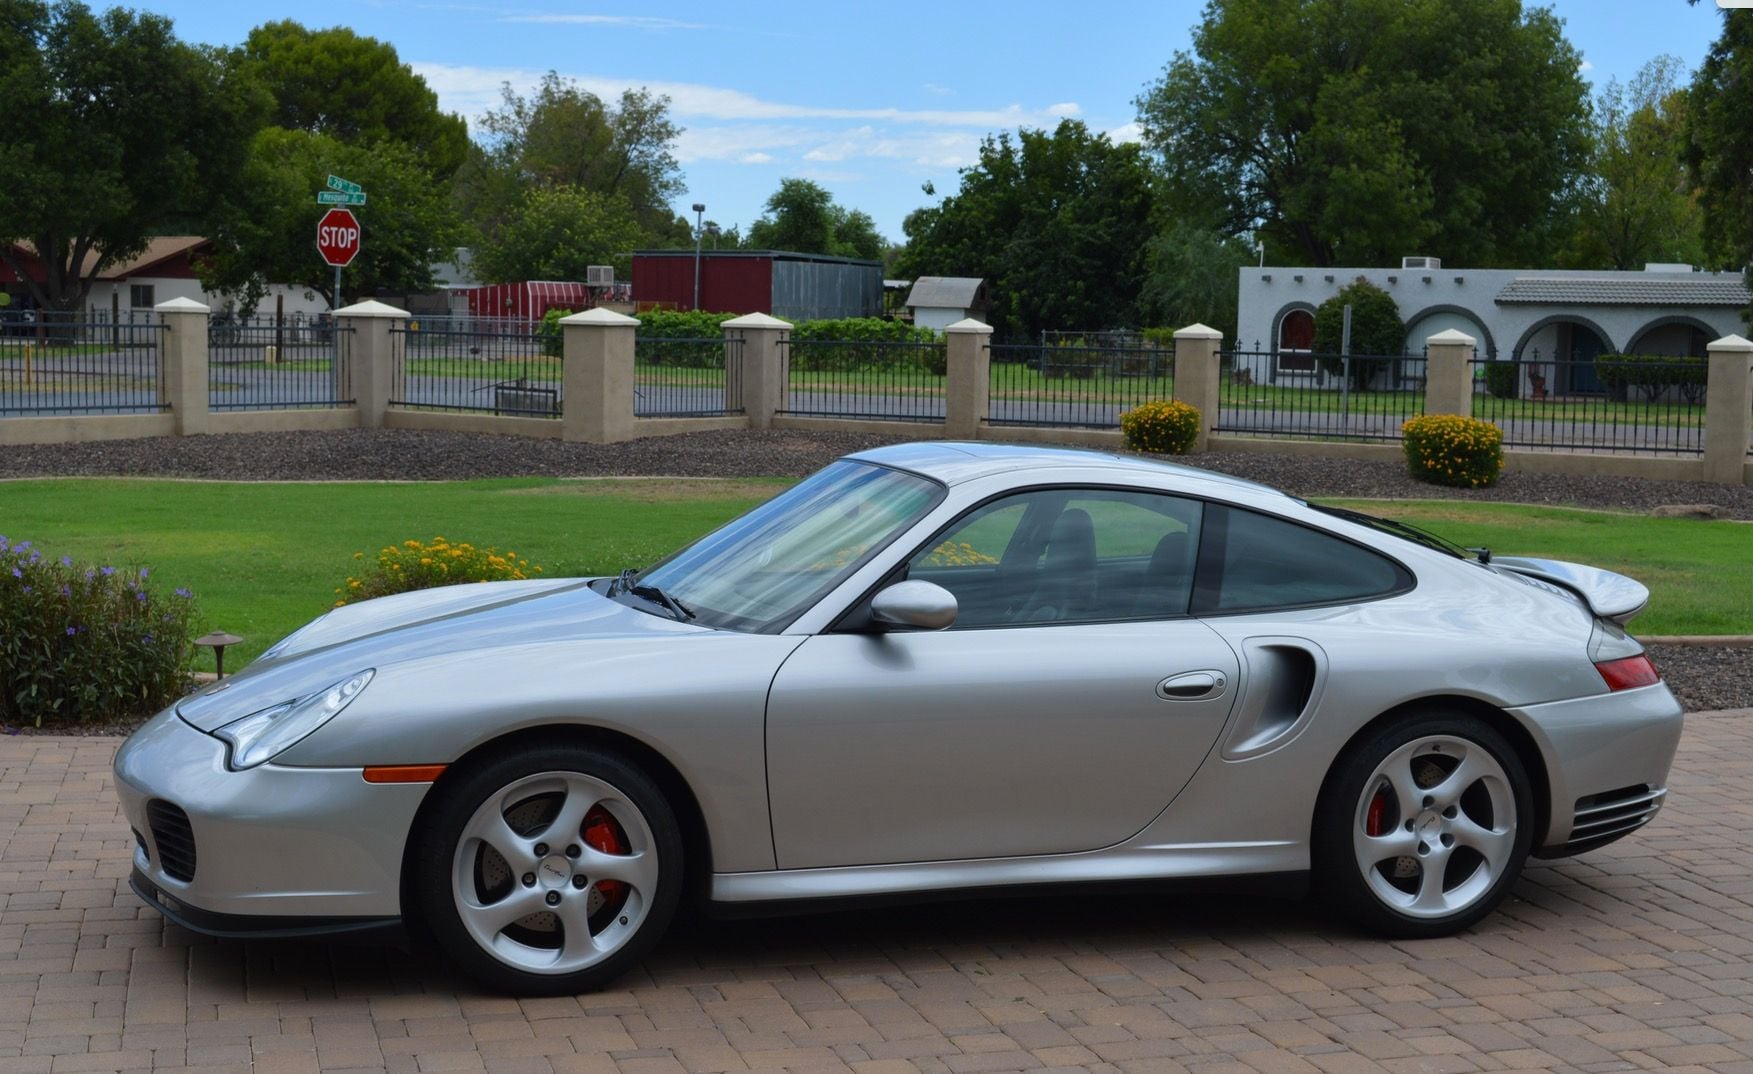 2003 Porsche 911 - 2003 996 Turbo Tip 19k miles, near mint condition - Used - VIN WP0AB29923S685252 - 19,610 Miles - 6 cyl - AWD - Automatic - Coupe - Silver - Gilbert, AZ 85296, United States